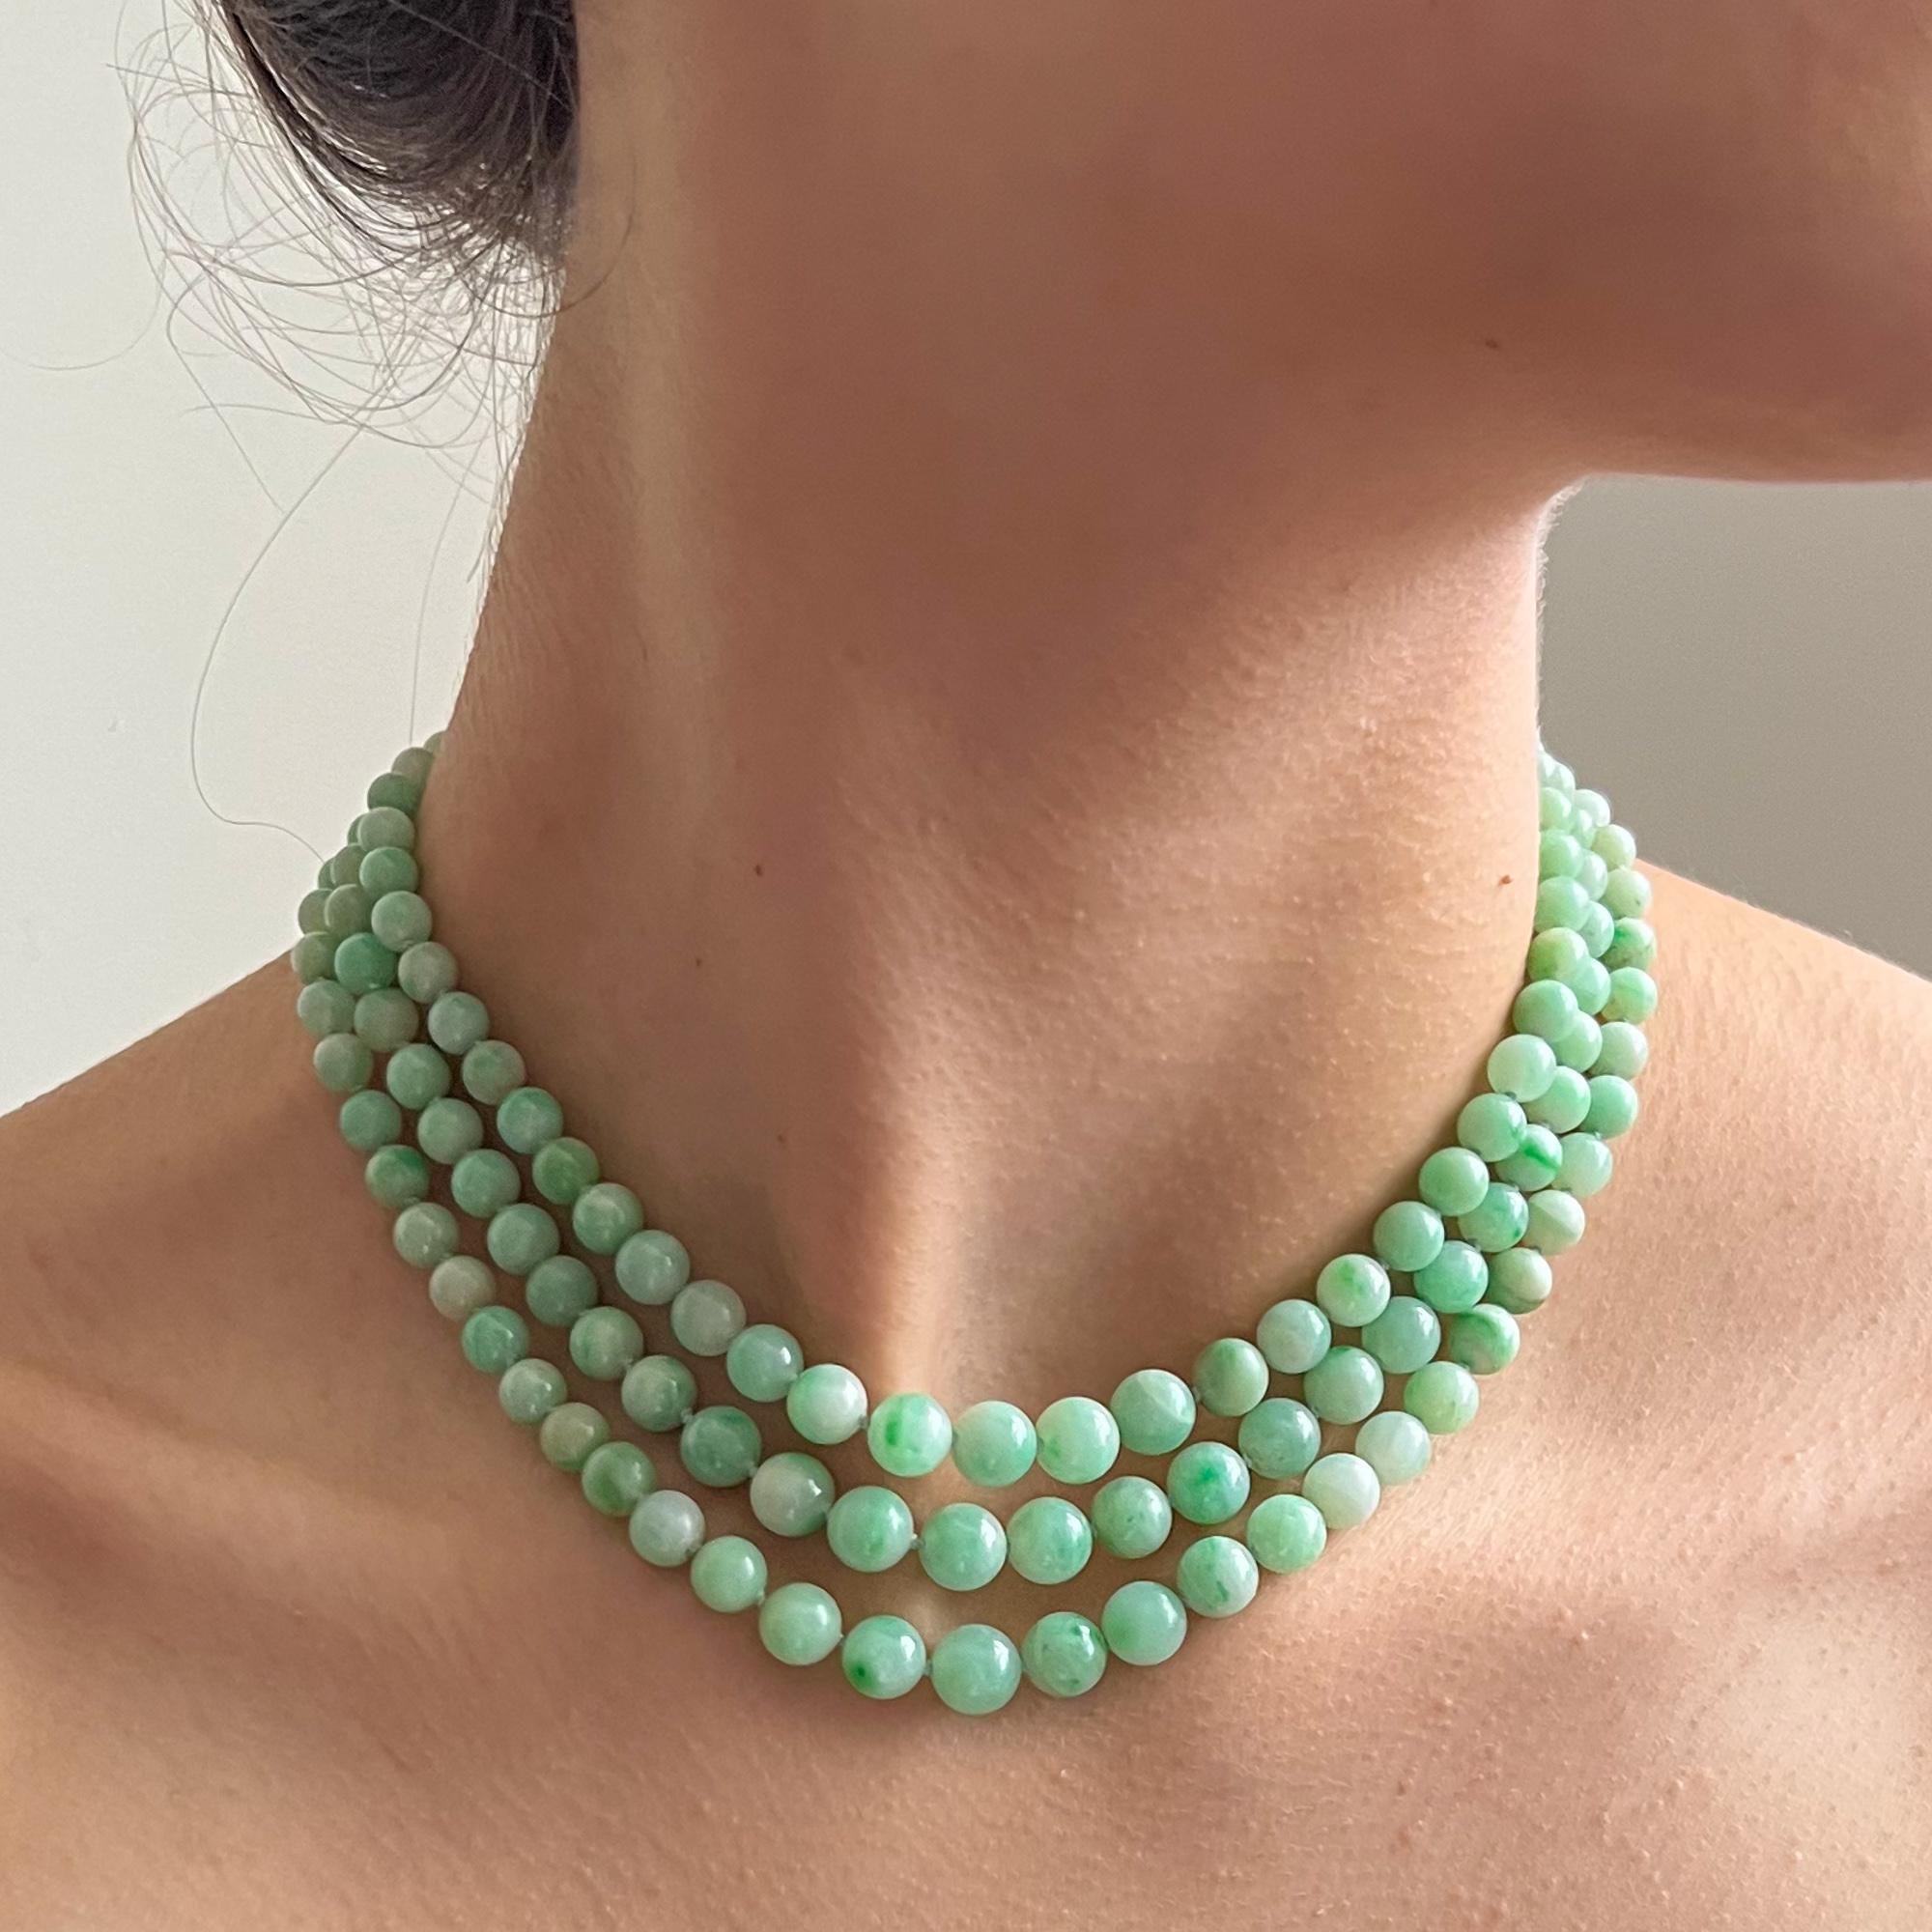 This apple green jadeite jade multi-strand necklace is from the early 20th century. The necklace consists of 154 jadeite jade stones, every piece of jade on this necklace is mottled in green and white. The jade strands are strung with these